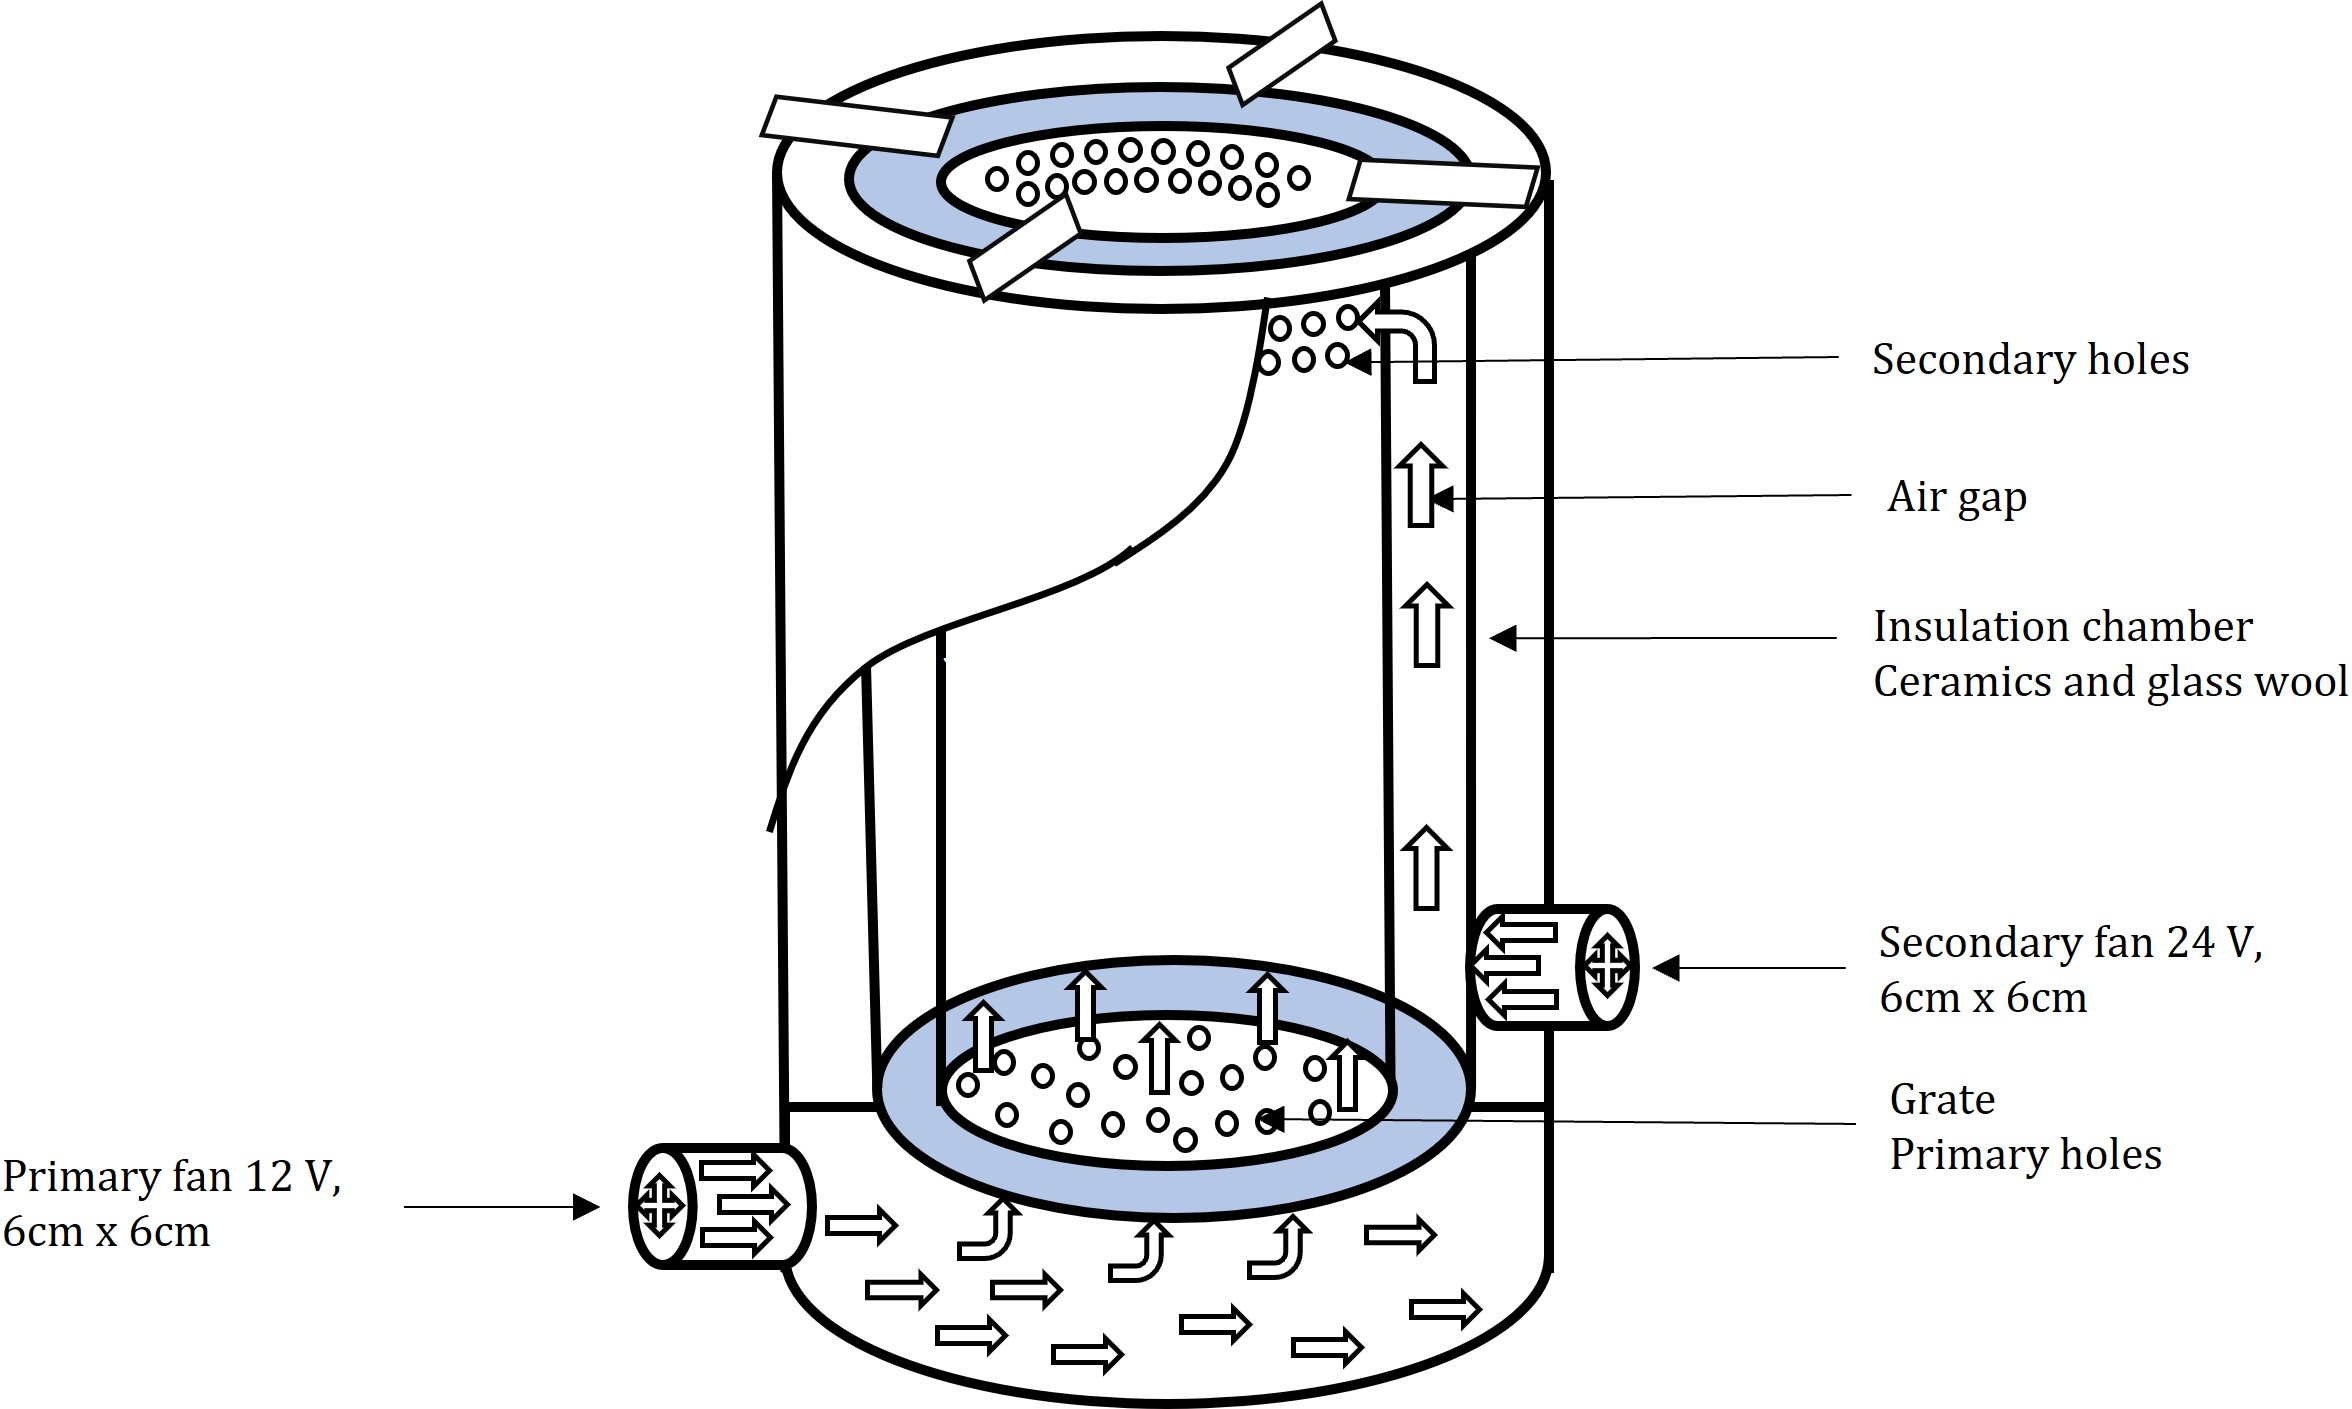 Schematic diagram of the laboratory-made gasifier cookstove model, based on Himanshu et al. (2022) and Tyagi (2022)